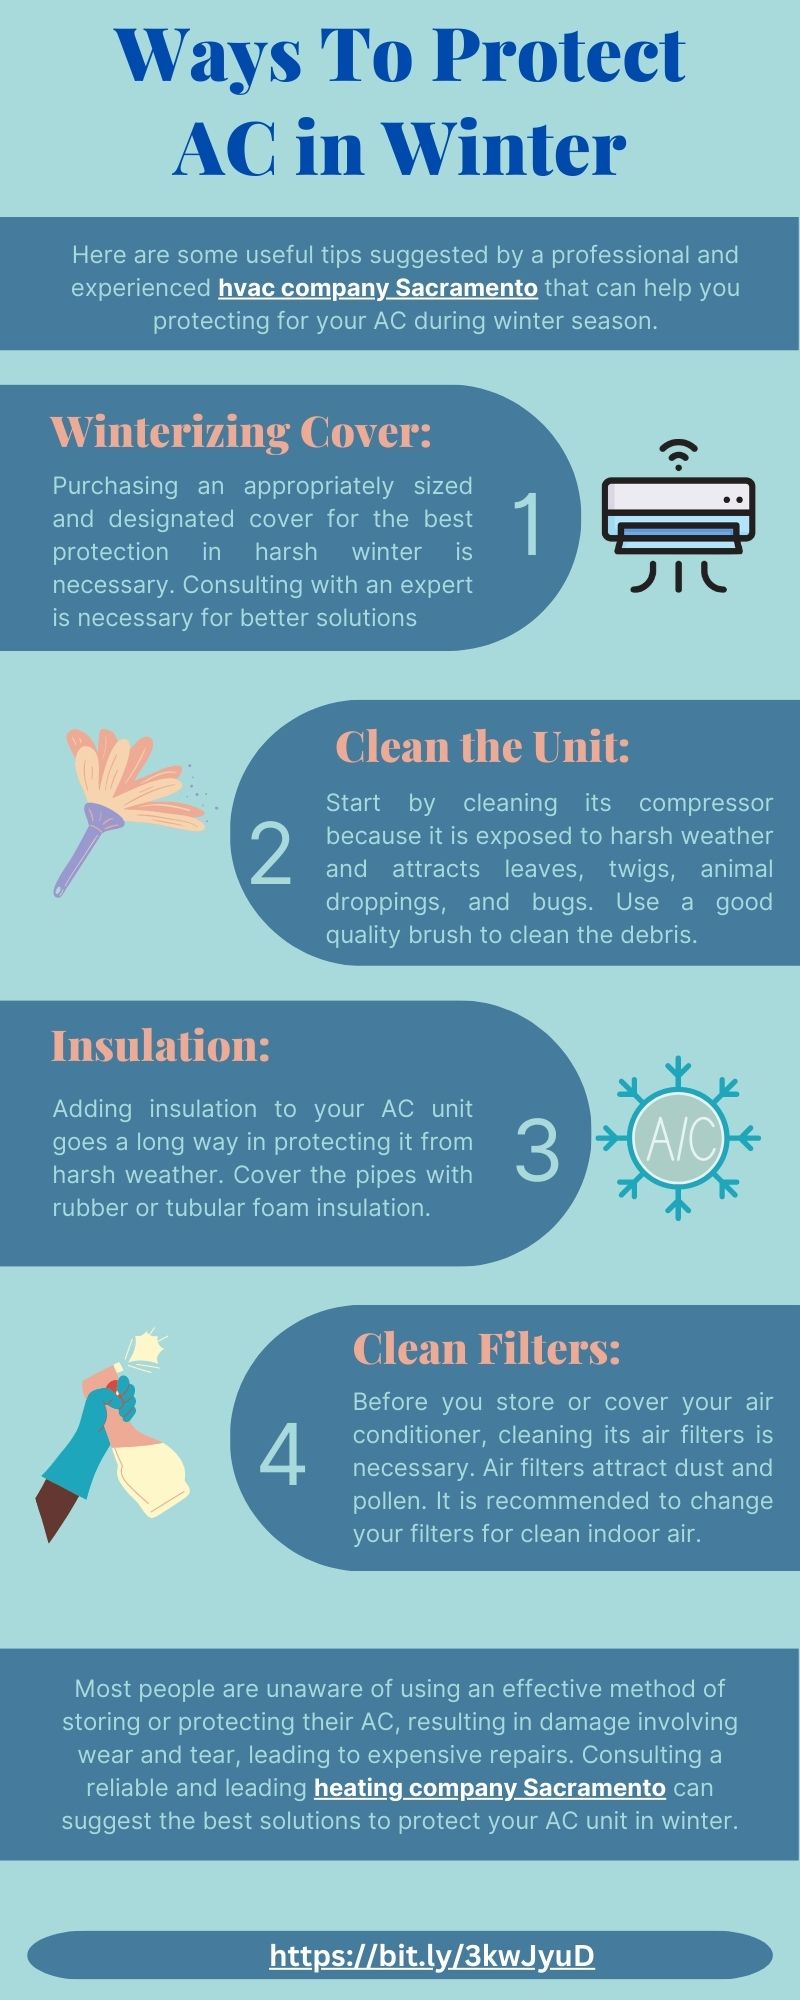 Ways To Protect AC in Winter